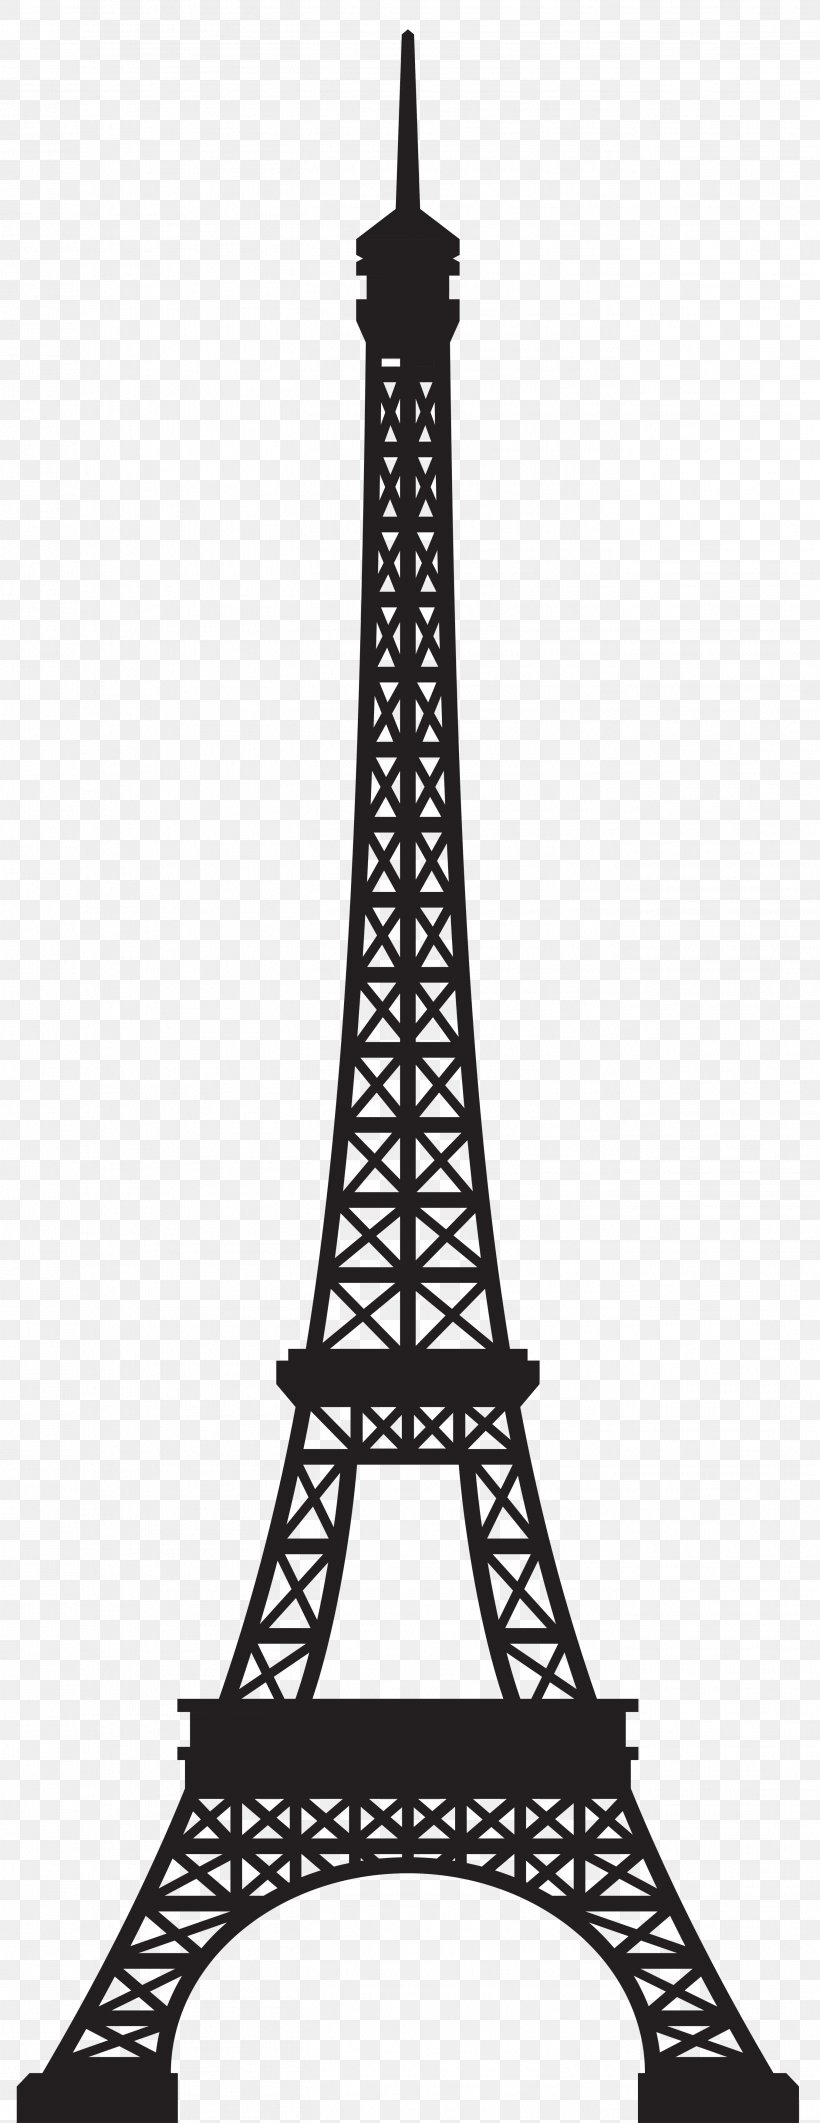 Eiffel Tower Silhouette Clip Art, PNG, 2703x7000px, Eiffel Tower, Art, Black, Black And White, Drawing Download Free